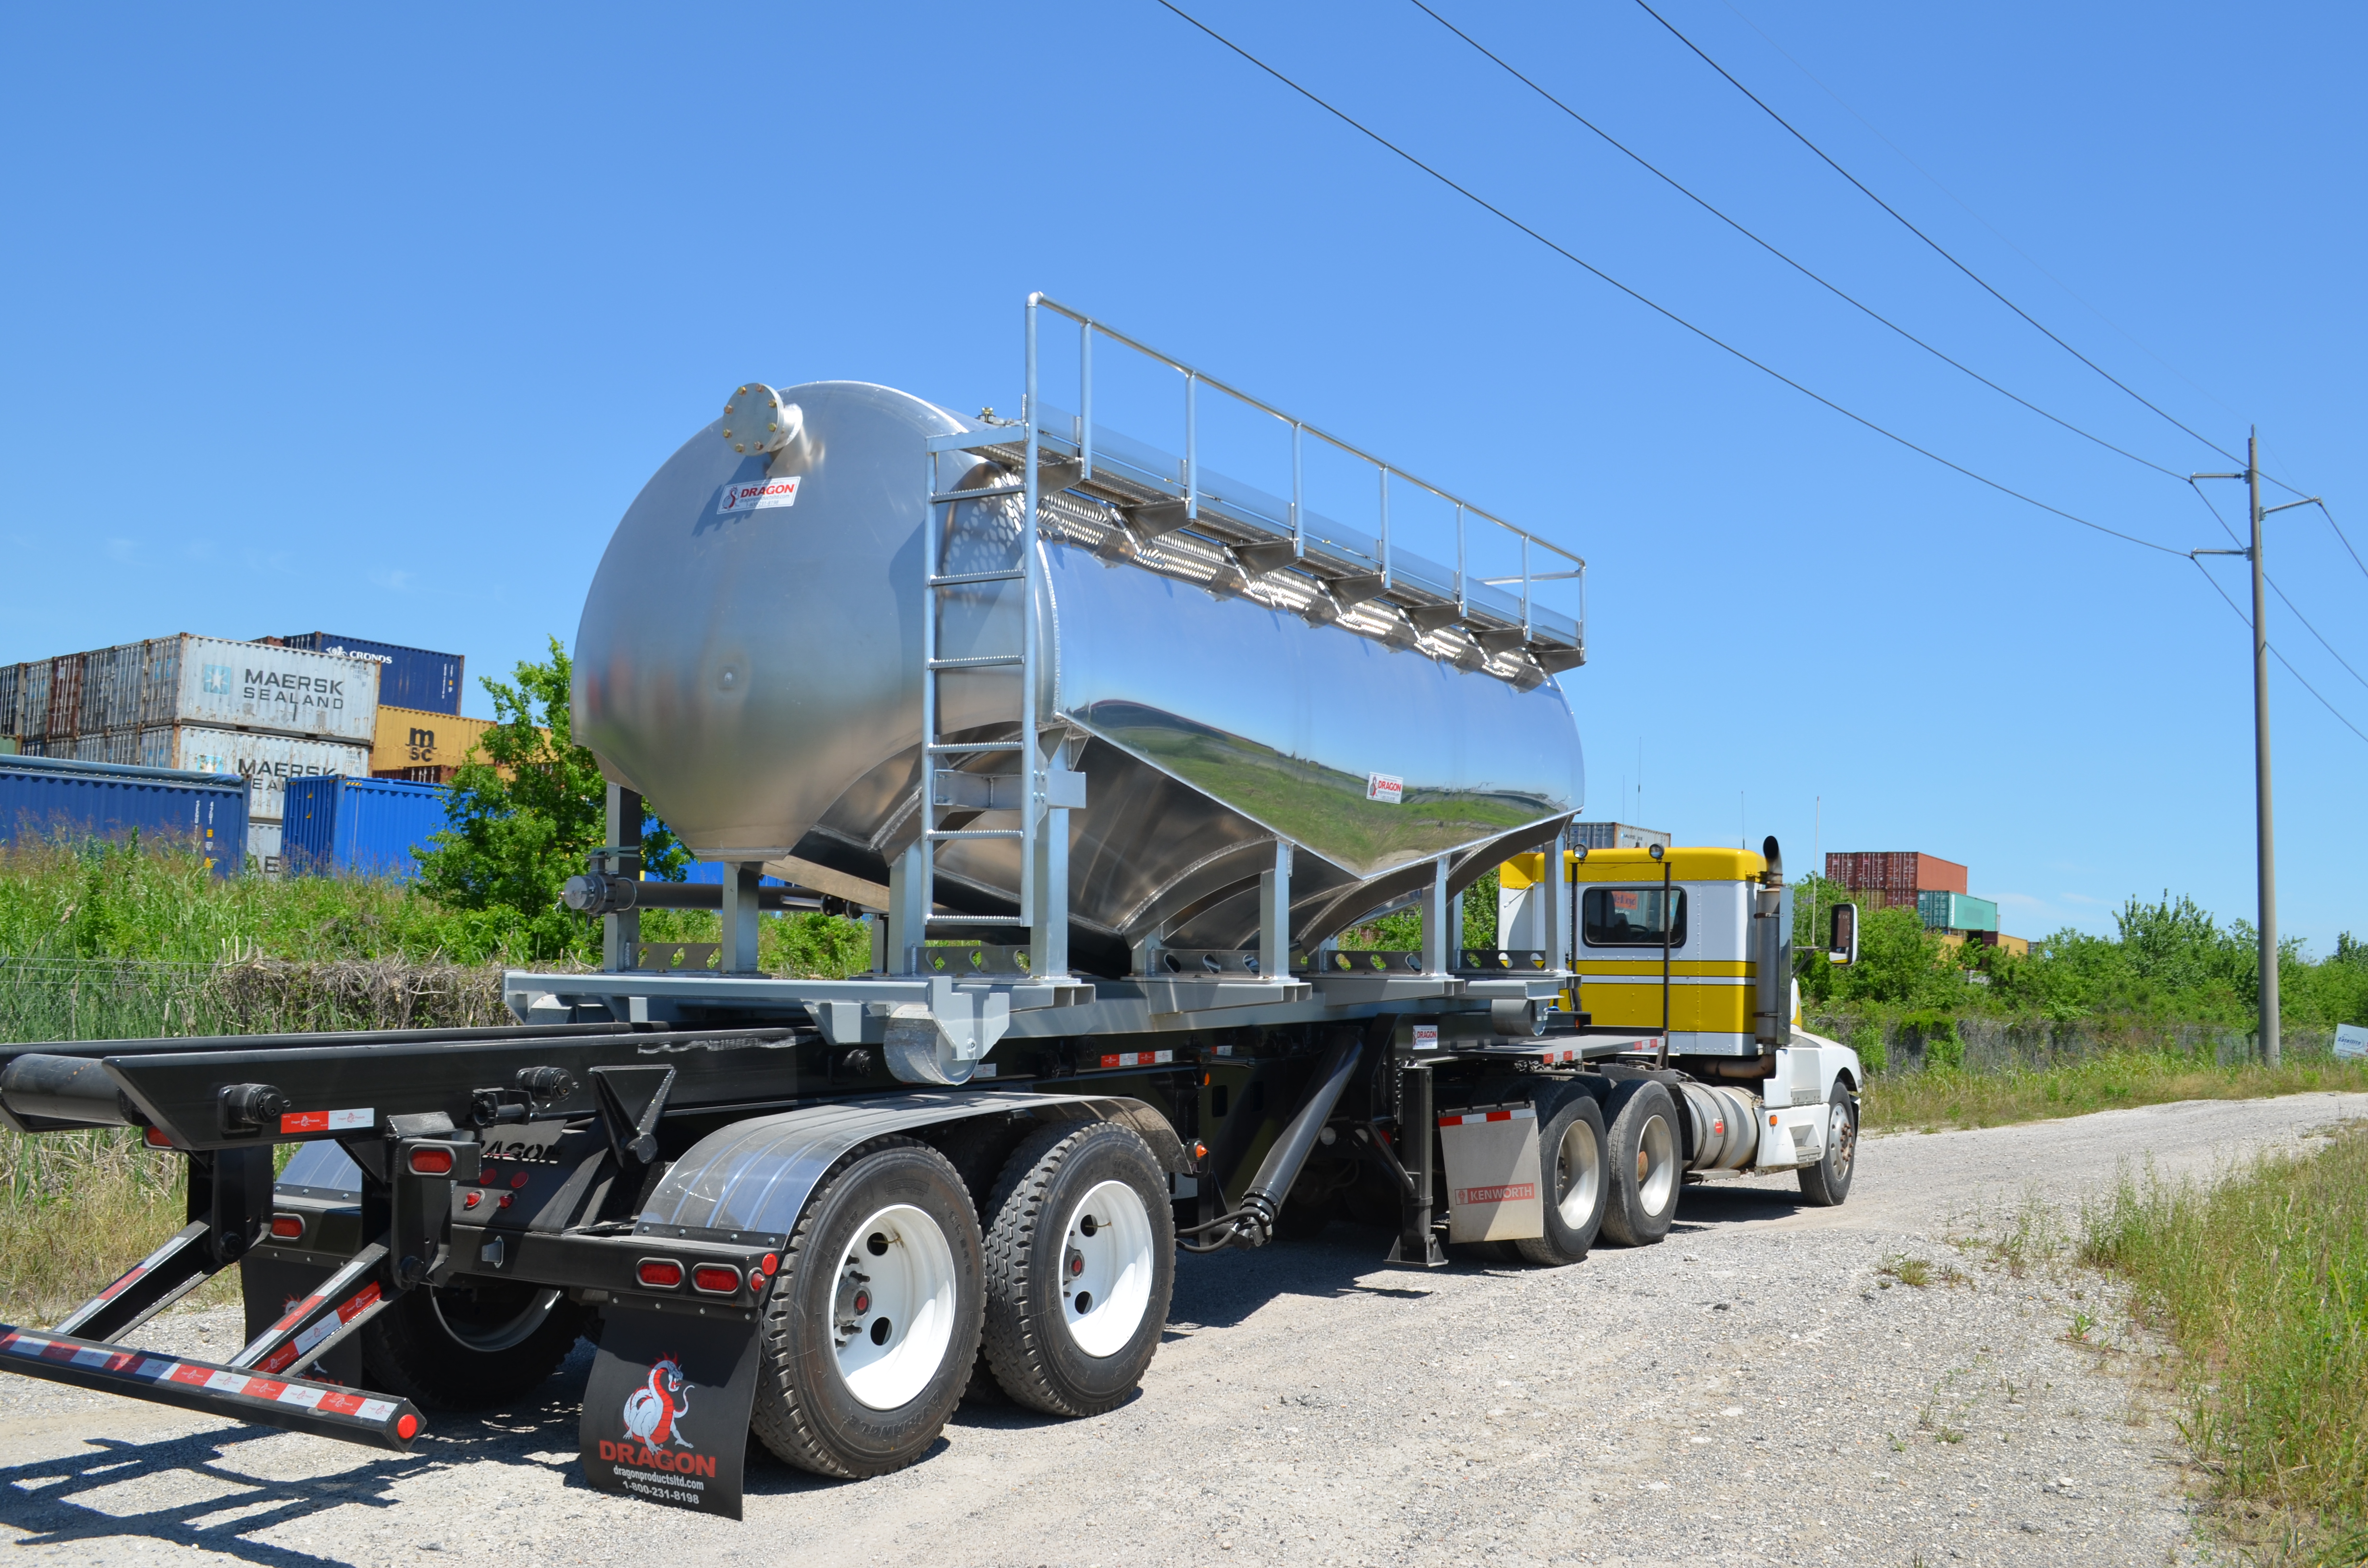 DRAGON PRODUCTS OFFERS THE NEXT GENERATION OF PNEUMATIC FRAC SAND DELIVERY AND STORAGE SOLUTIONS